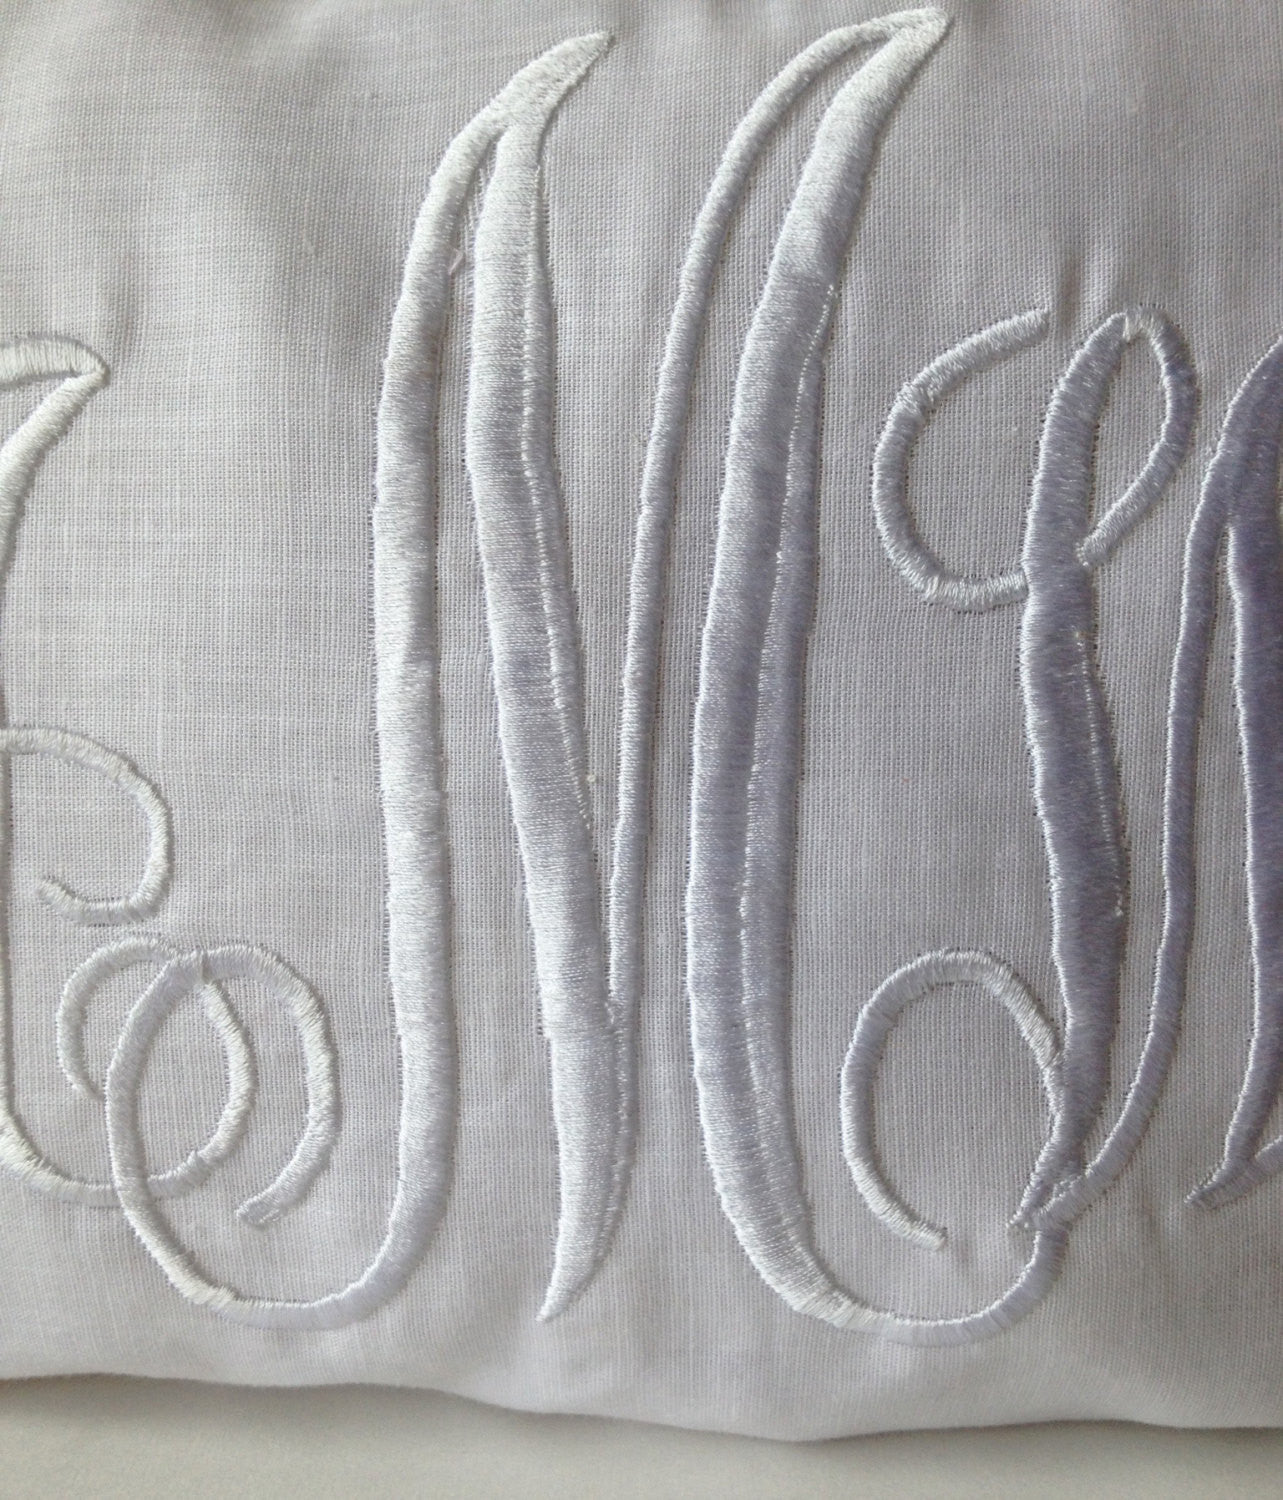 Shop for handmade white linen pillow covers with custom monogram – Amore  Beauté